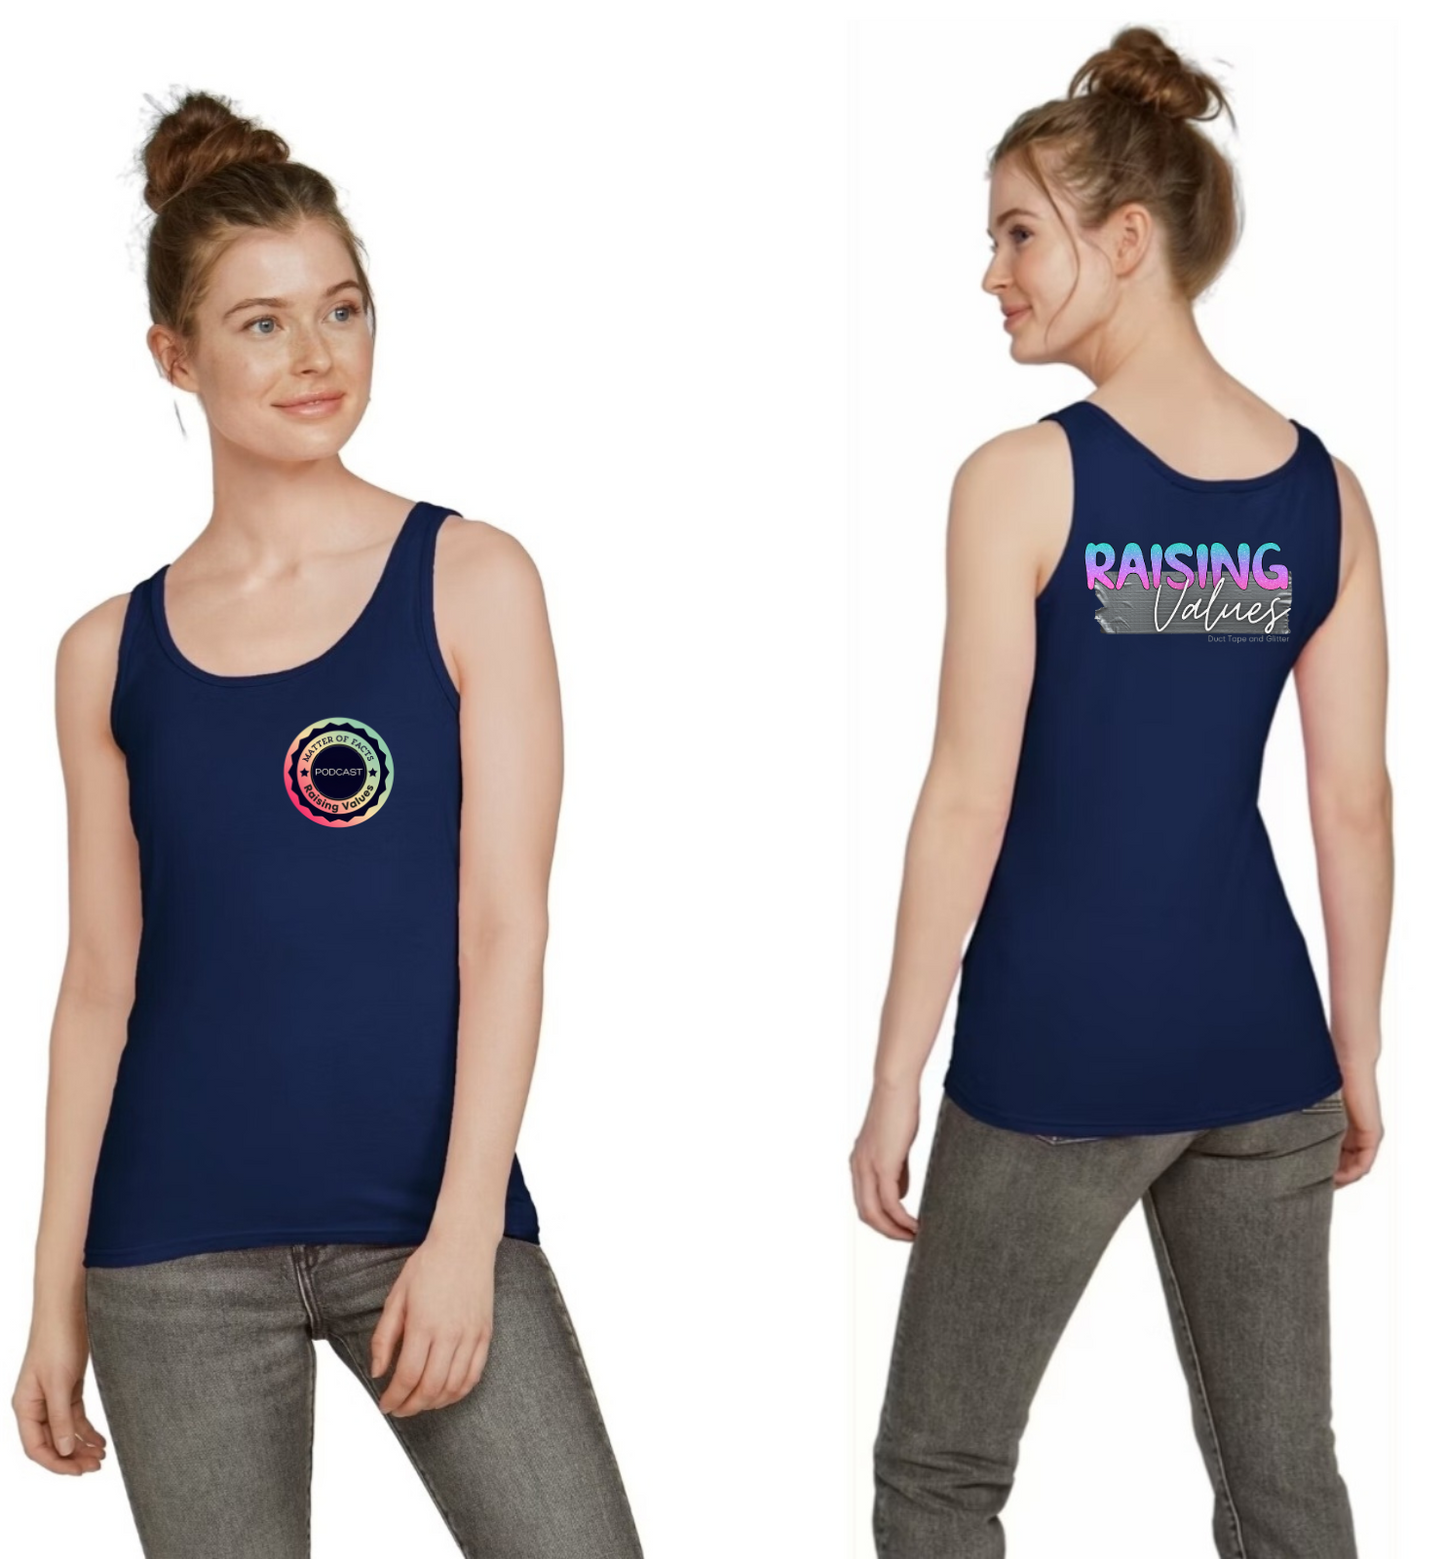 LADIES MOF/RAISING VALUES FITTED TANK TOP- DUCT TAPE AND GLITTER BLUE